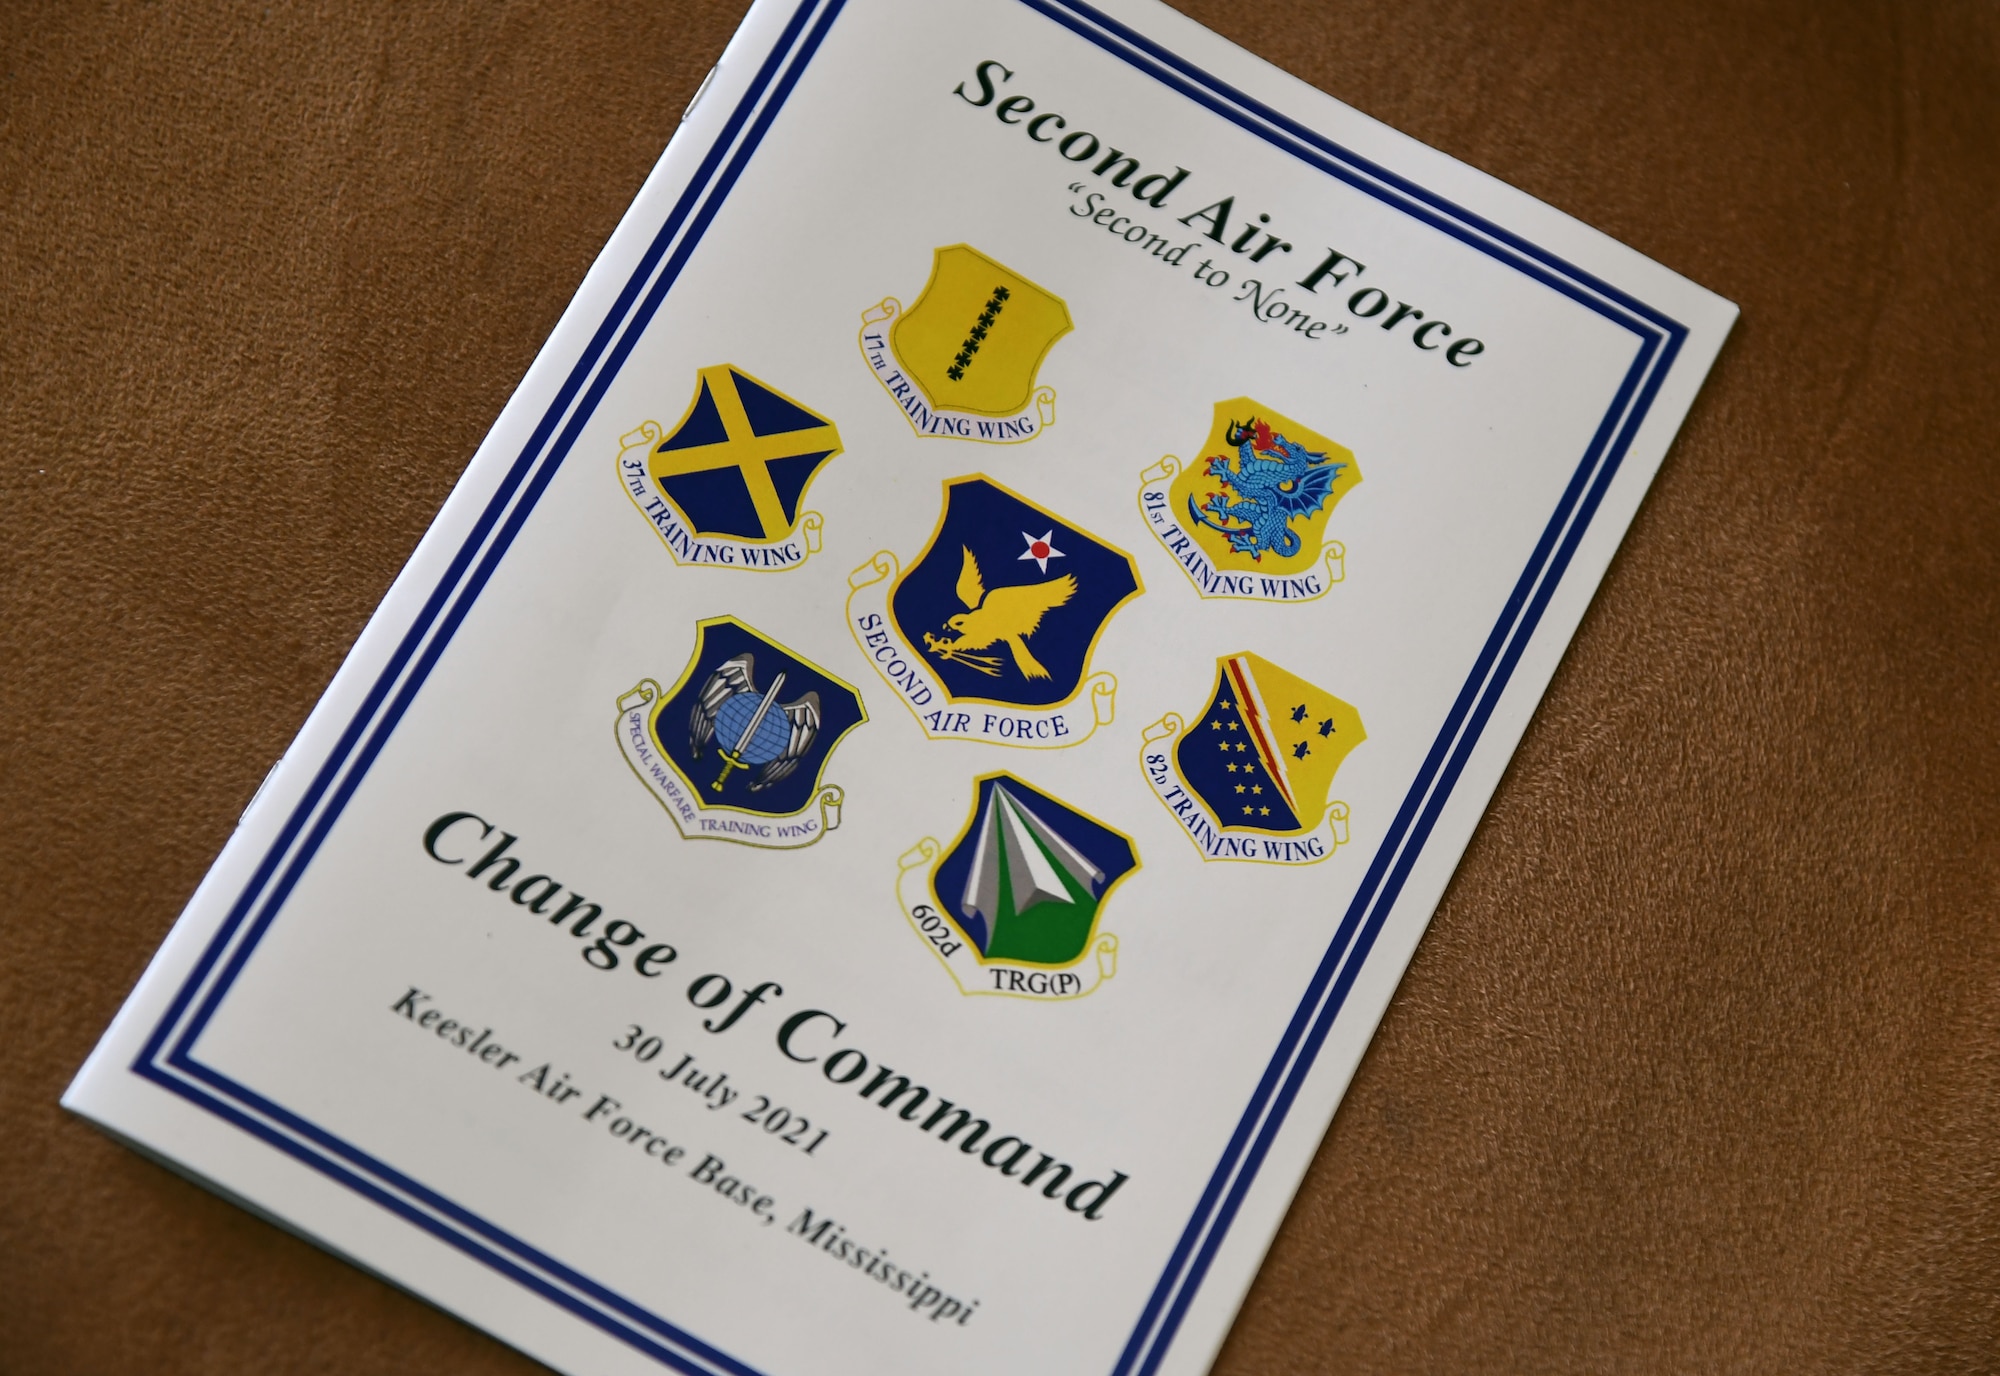 A pamphlet is on display during the Second Air Force change of command ceremony inside the Bay Breeze Event Center at Keesler Air Force Base, Mississippi, July 30, 2021. The ceremony is a symbol of command being exchanged from one commander to the next. Maj. Gen. Andrea Tullos relinquished command of the Second Air Force to Maj. Gen. Michele Edmondson. (U.S. Air Force photo by Kemberly Groue)